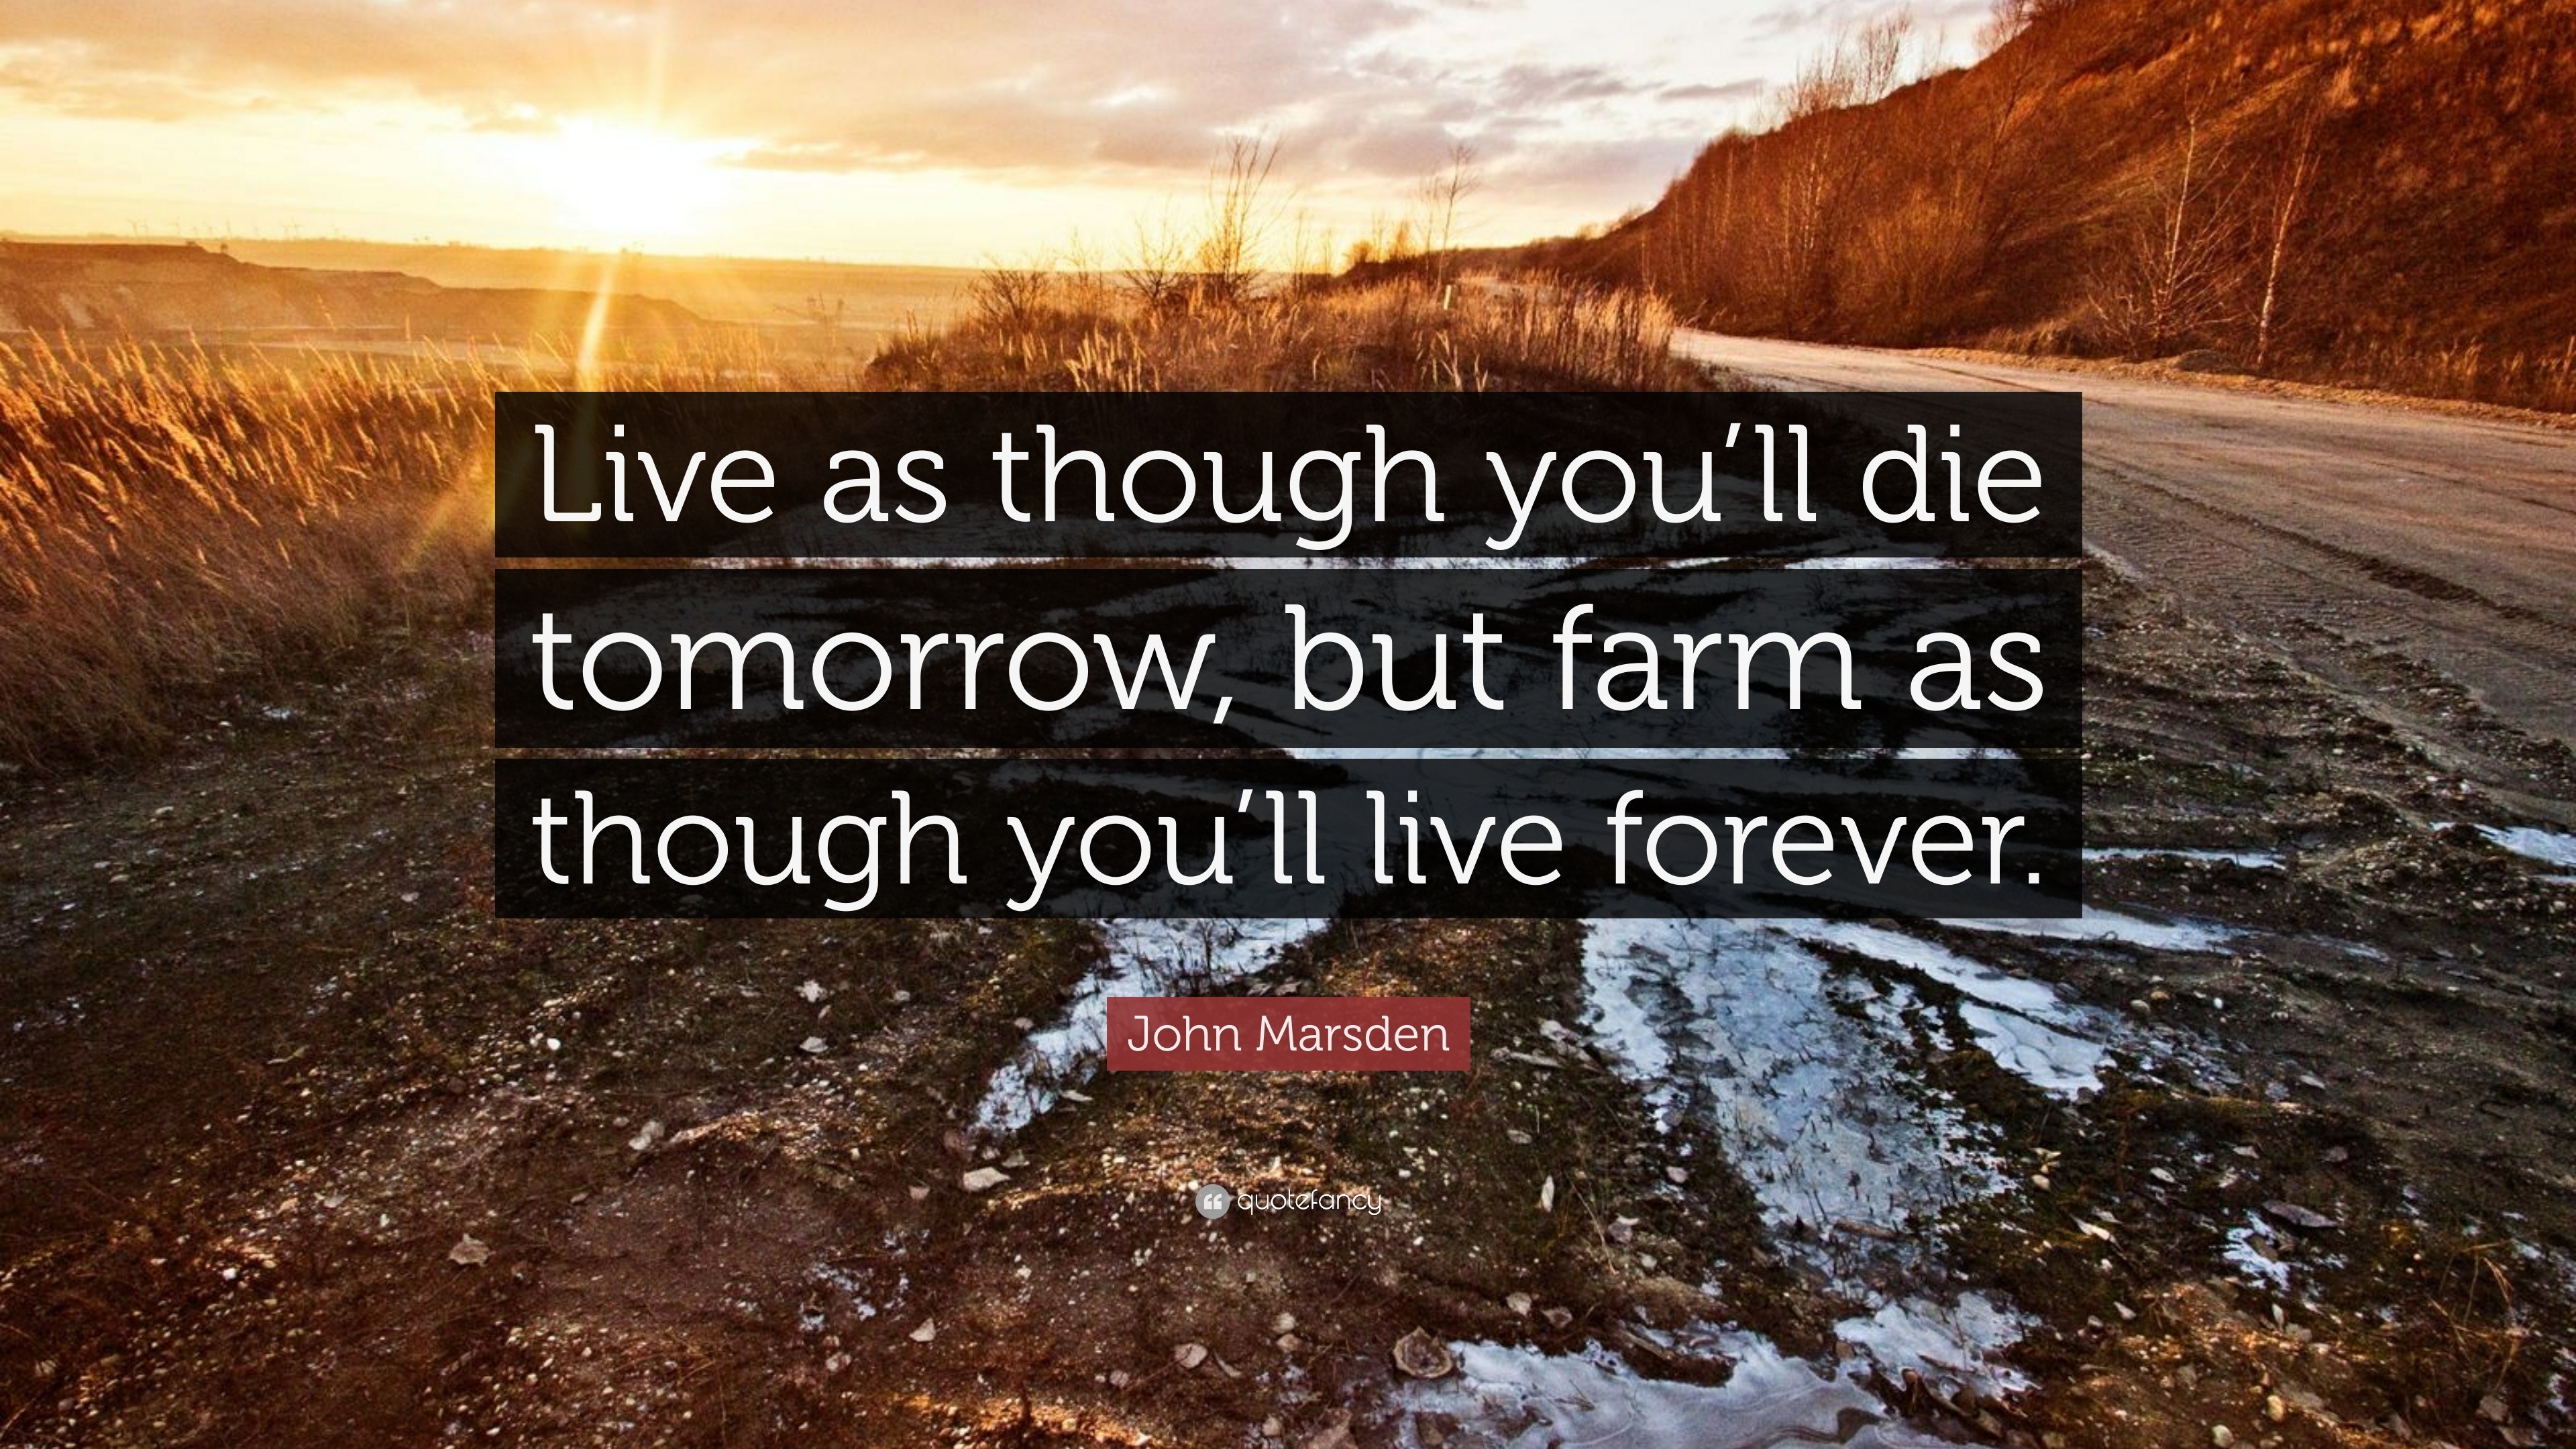 John Marsden Quote Live As Though You Ll Die Tomorrow But Farm As Though You Ll